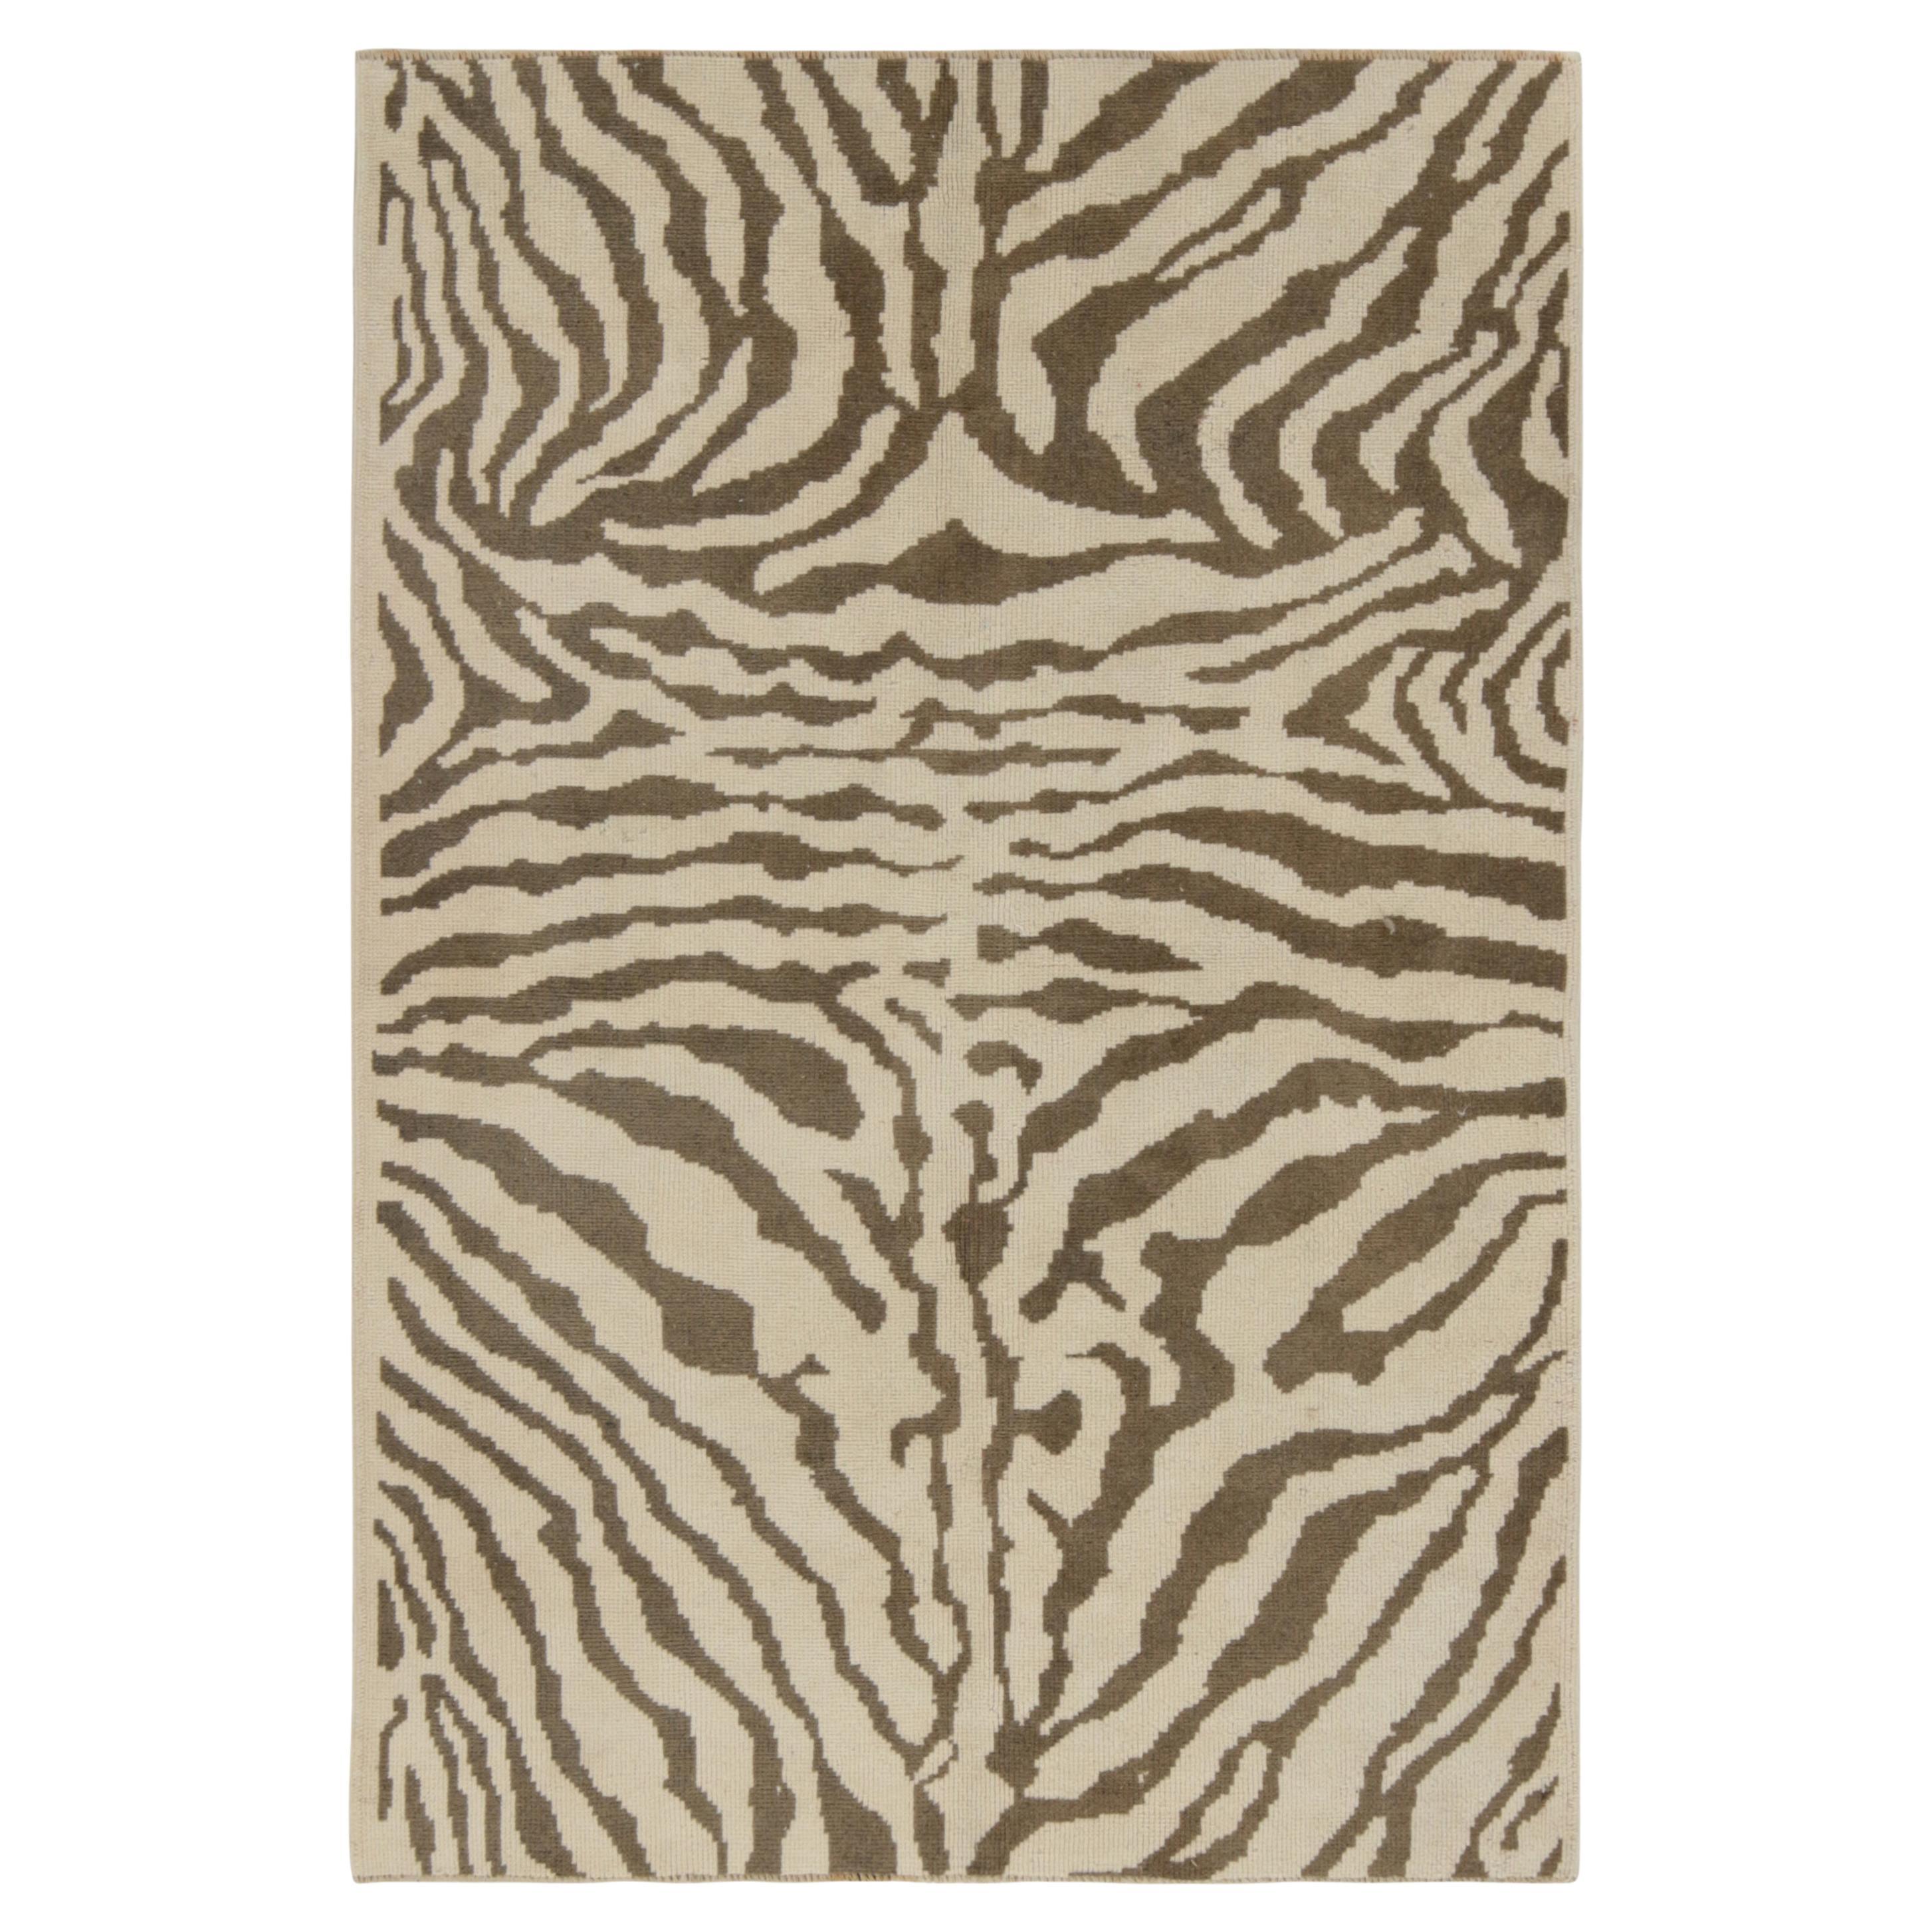 Vintage Tiger Skin Style Rug in Taupe with Brown Pattern, by Rug & Kilim For Sale